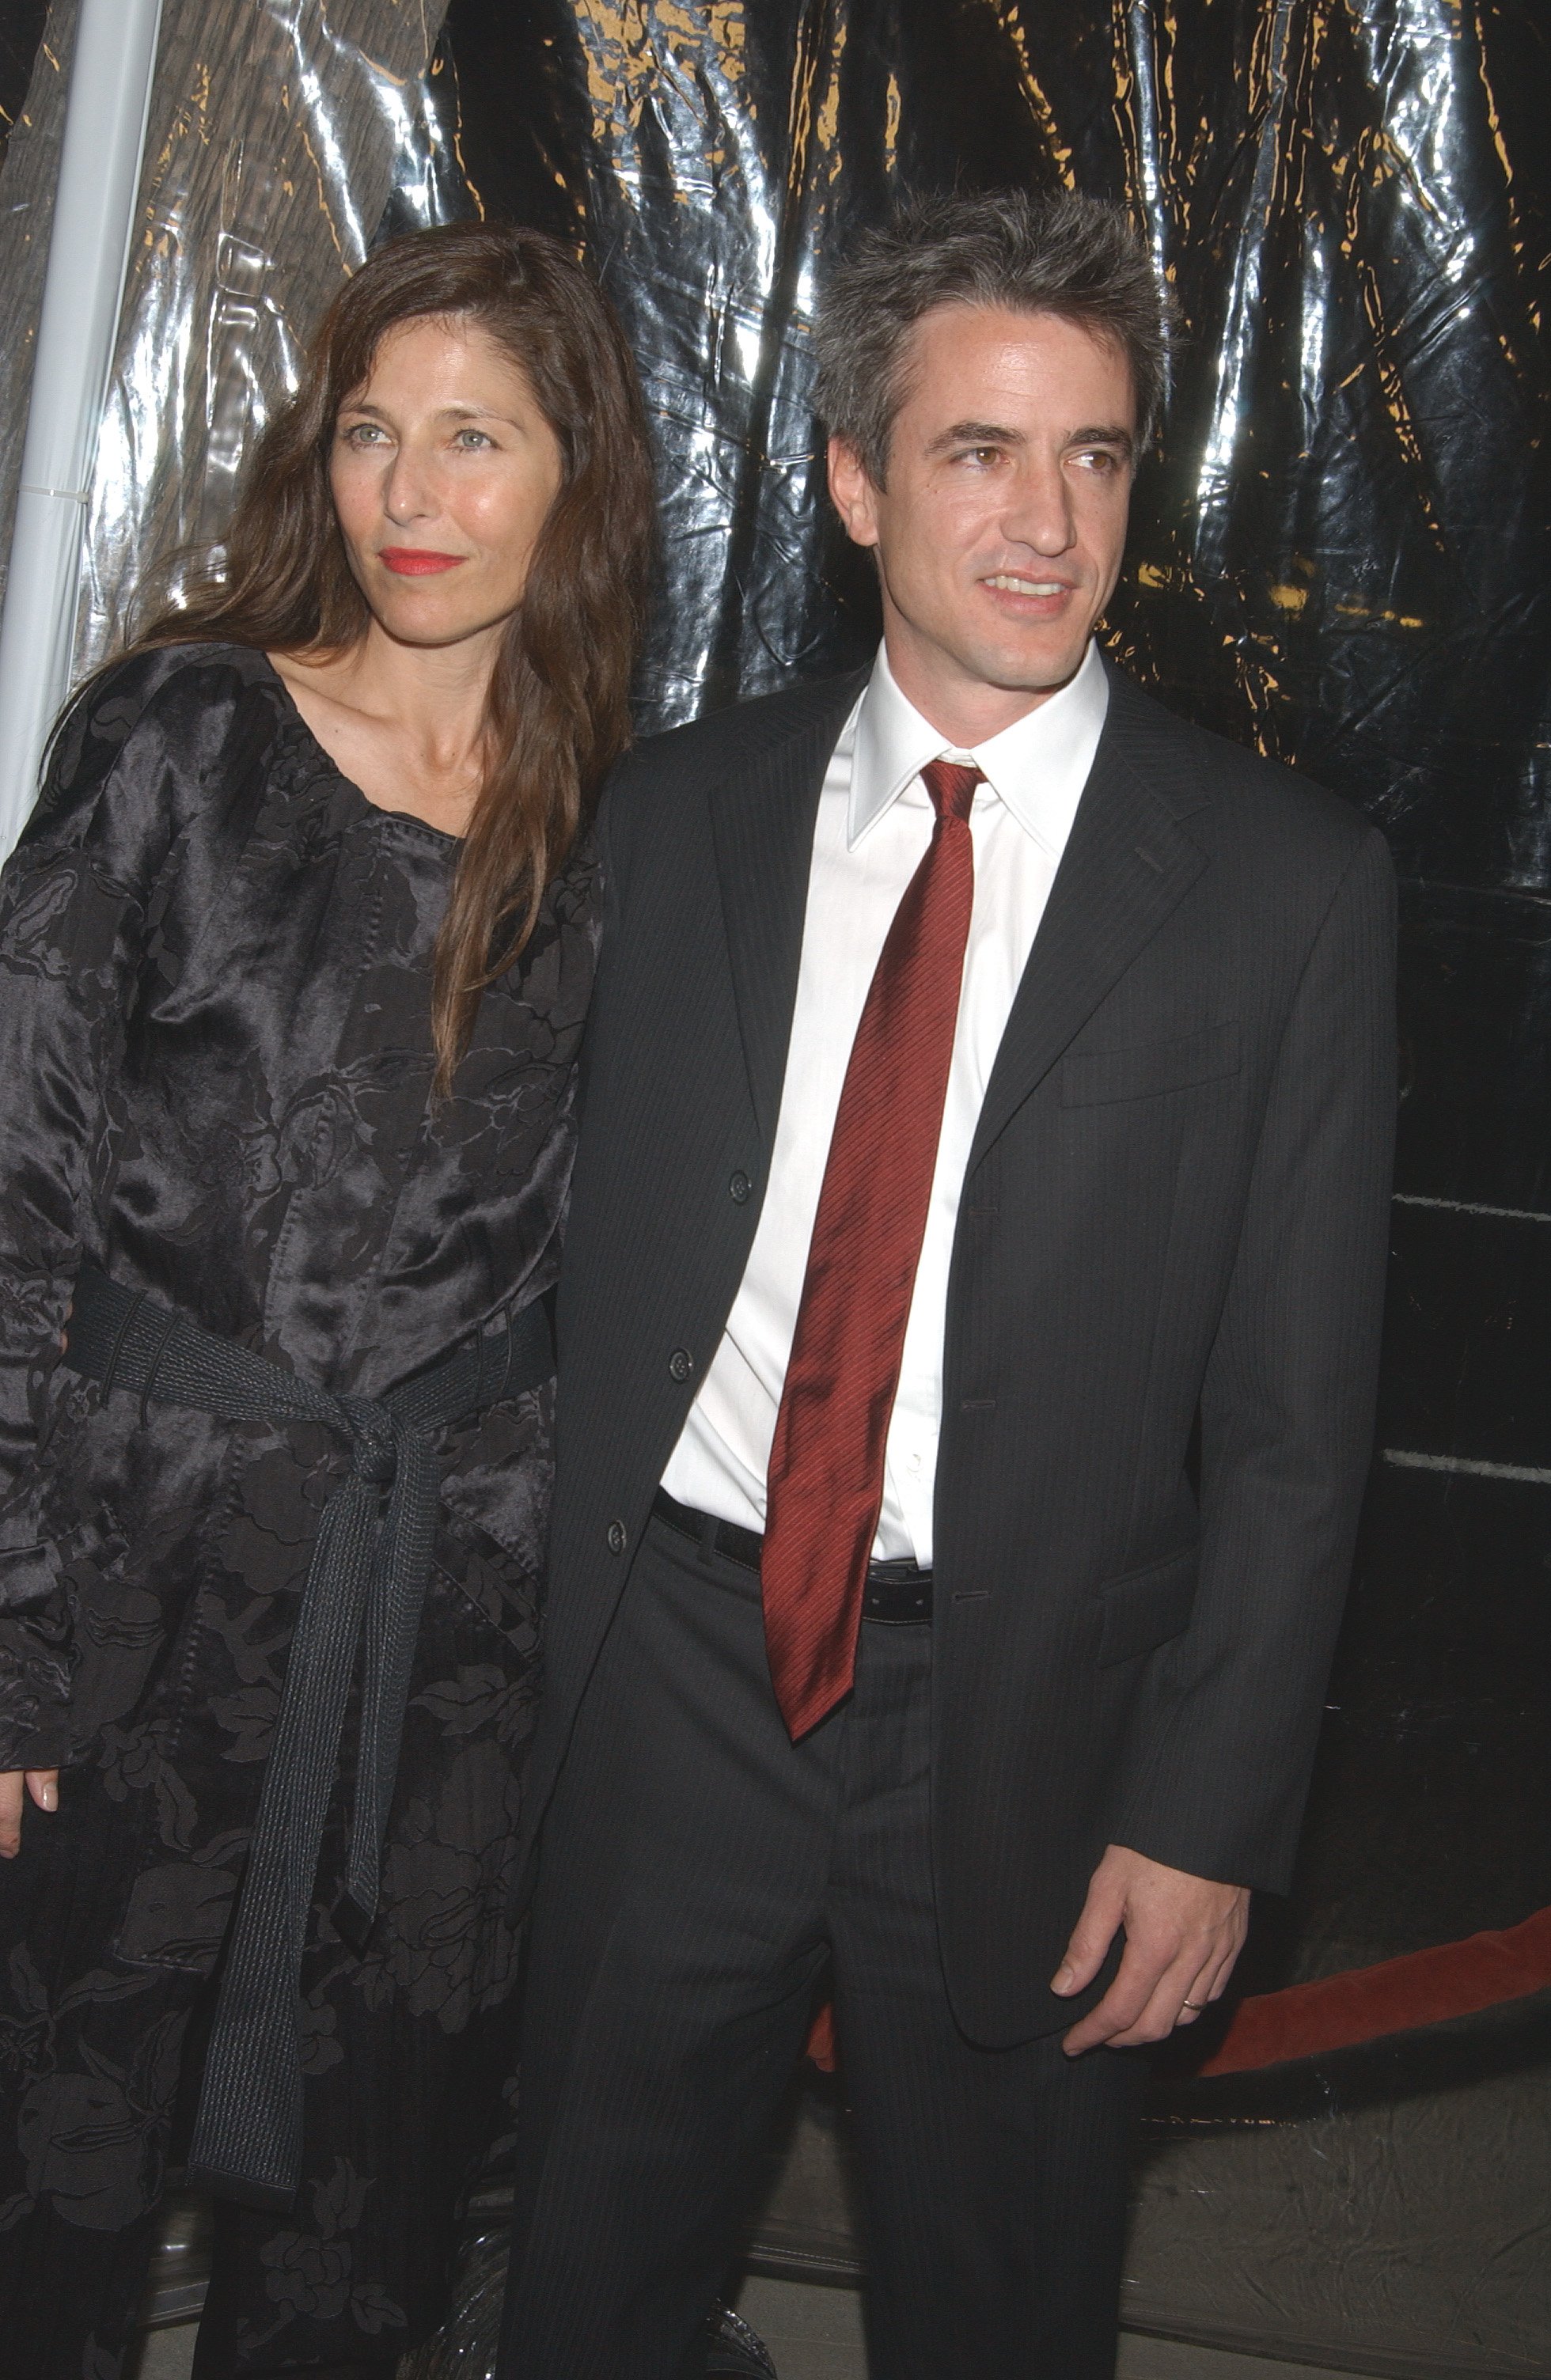 Dermot Mulroney and wife Catherine Keener arriving at the premiere of 'About Schmidt'. | Source: Getty Images